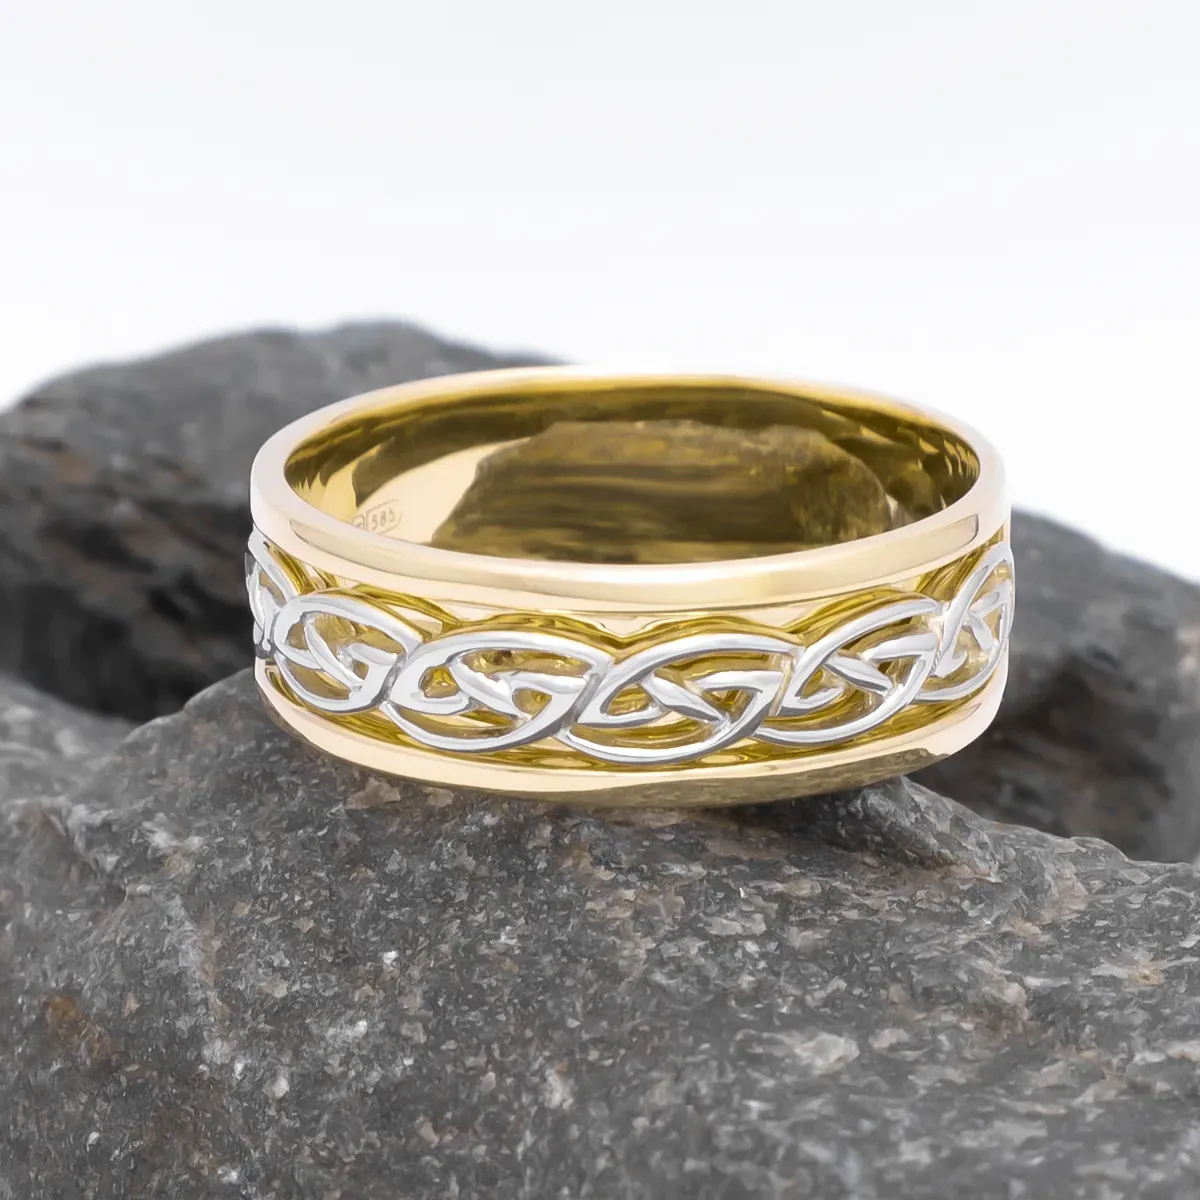 Gents Celtic Knot Wedding Band - Two Tone Gold